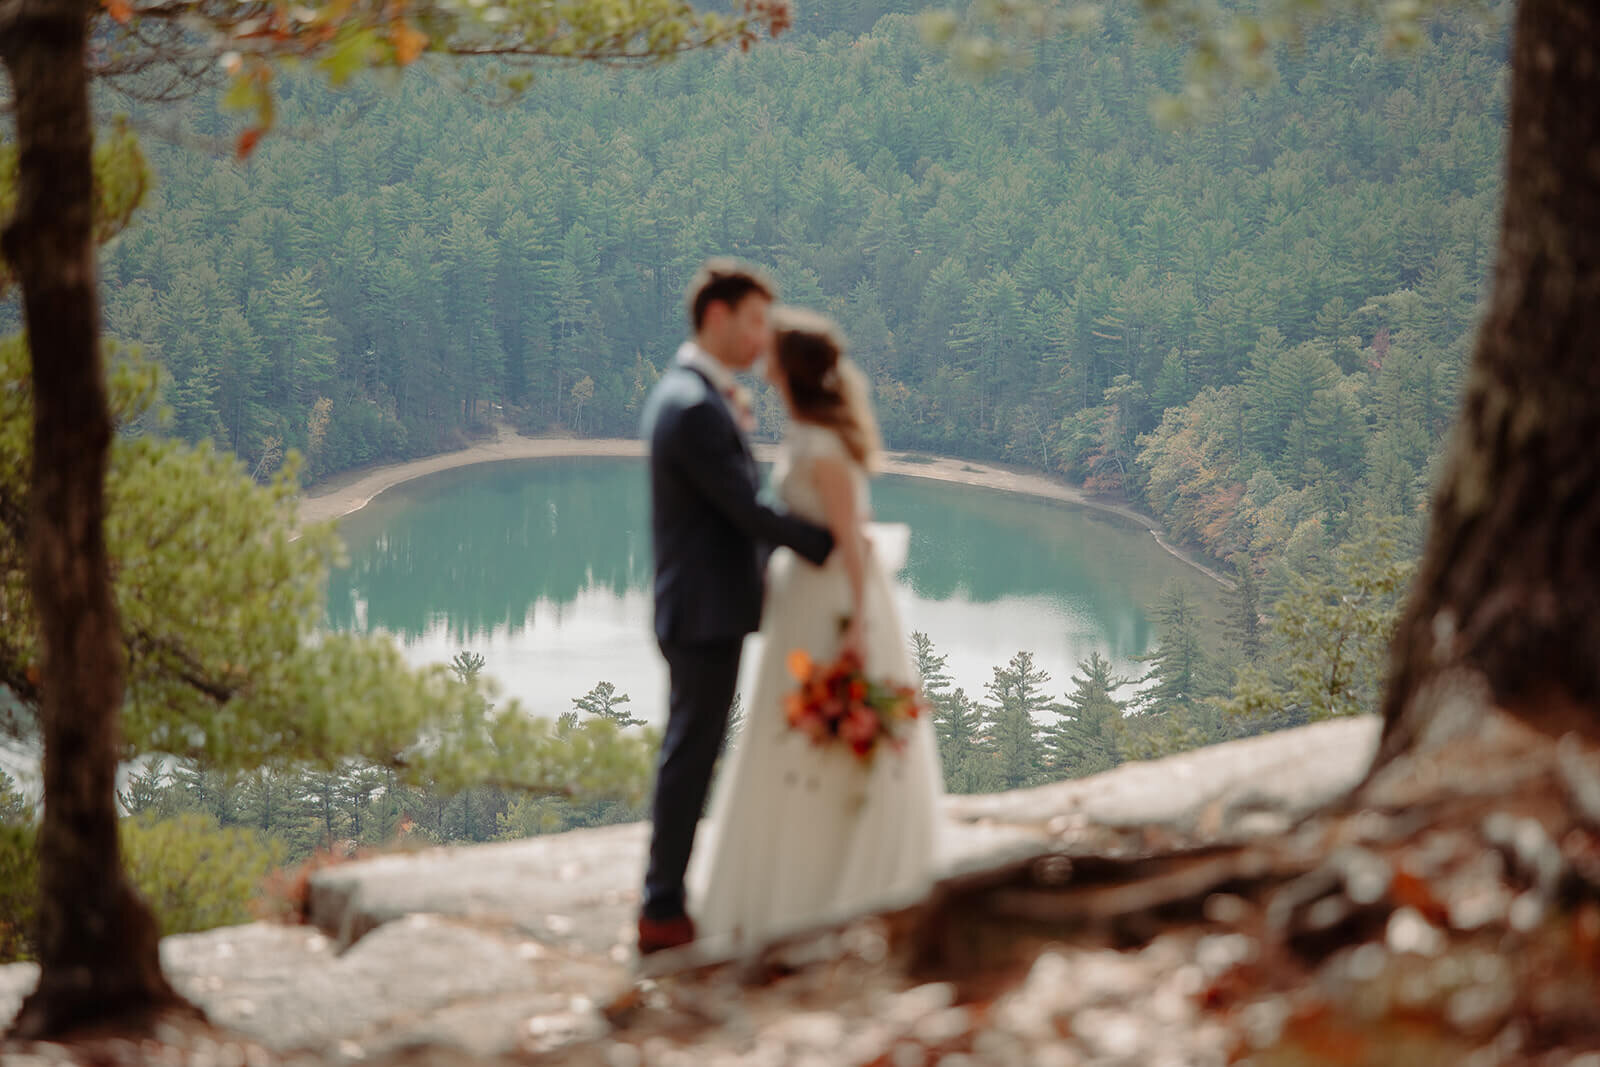  The couple steals a quiet moment after their elopement ceremony to take in the view and each other in the White Mountains in New Hampshire on Cathedral Ledge overlooking Echo Lake. New Hampshire elopement 